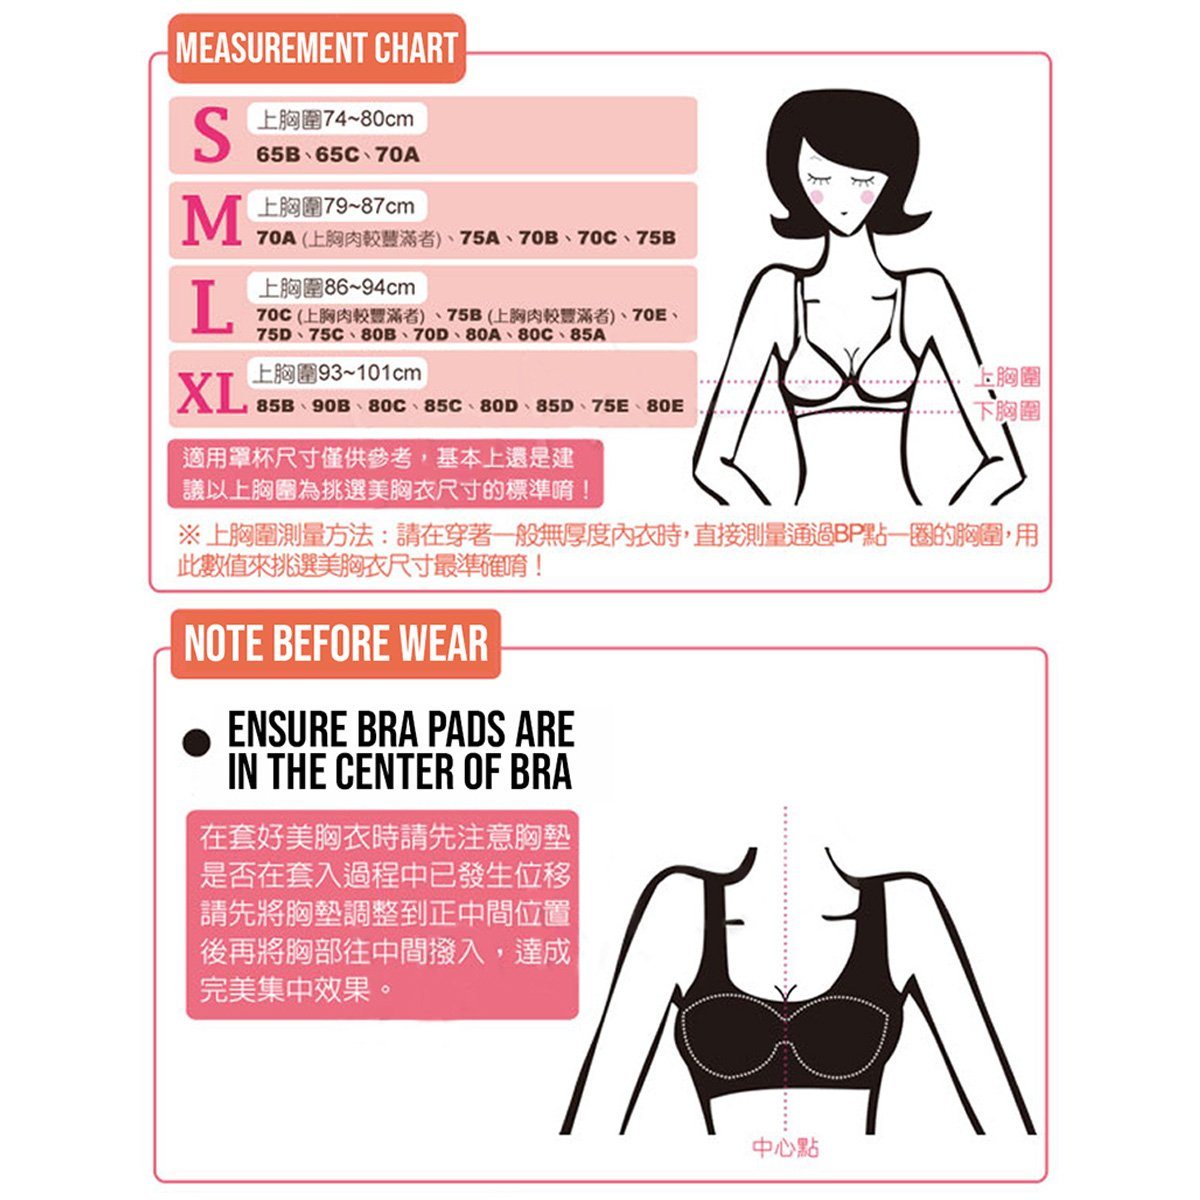 ($14.90 Only) Eheart Non-wired V-line Push-up Beauty Bra (U-Back Design) - Bloom Concept